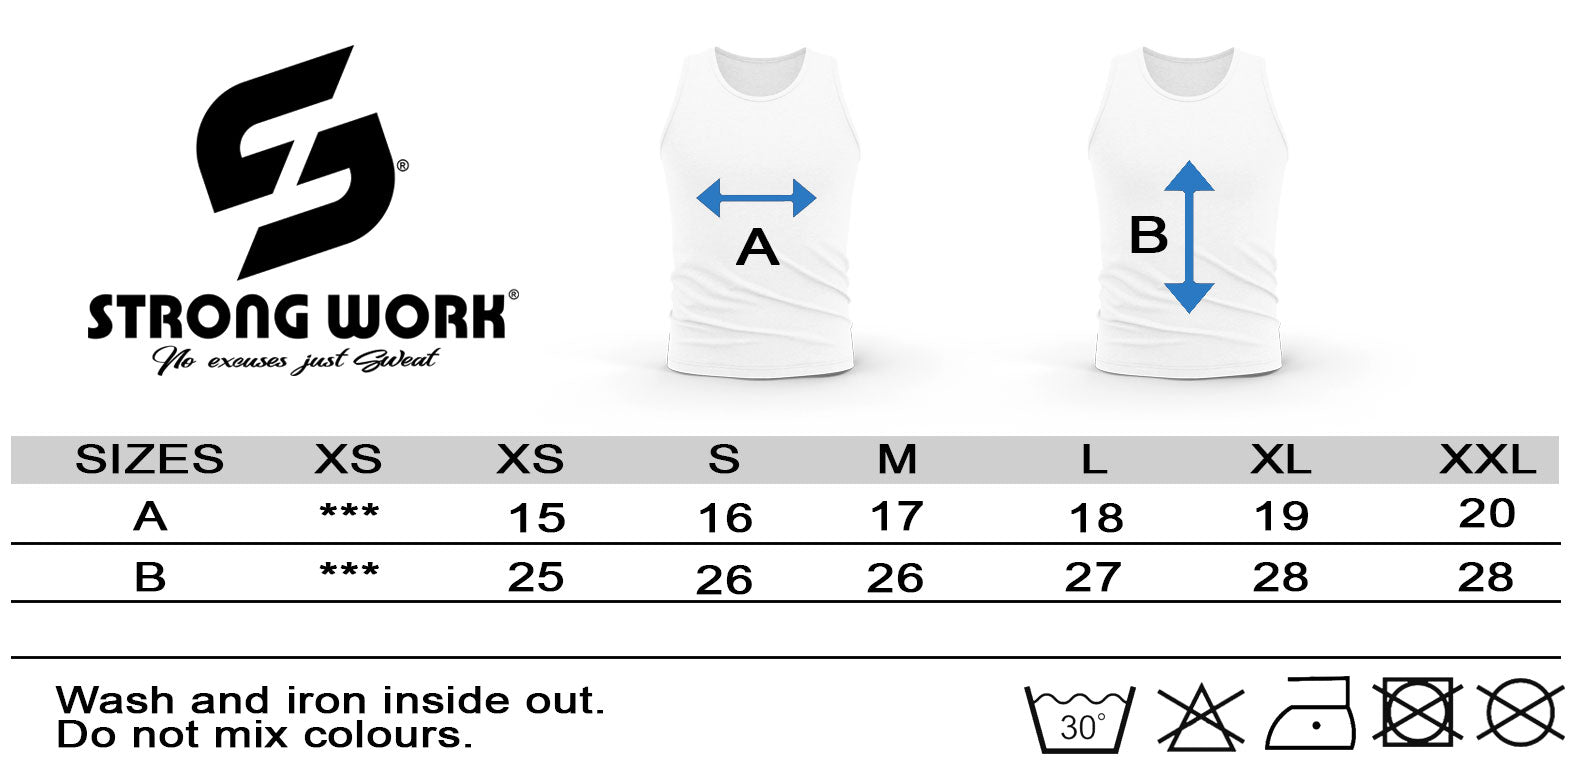 SIZE GUIDE - STRONG WORK INTENSITY TANK TOP FOR WOMEN